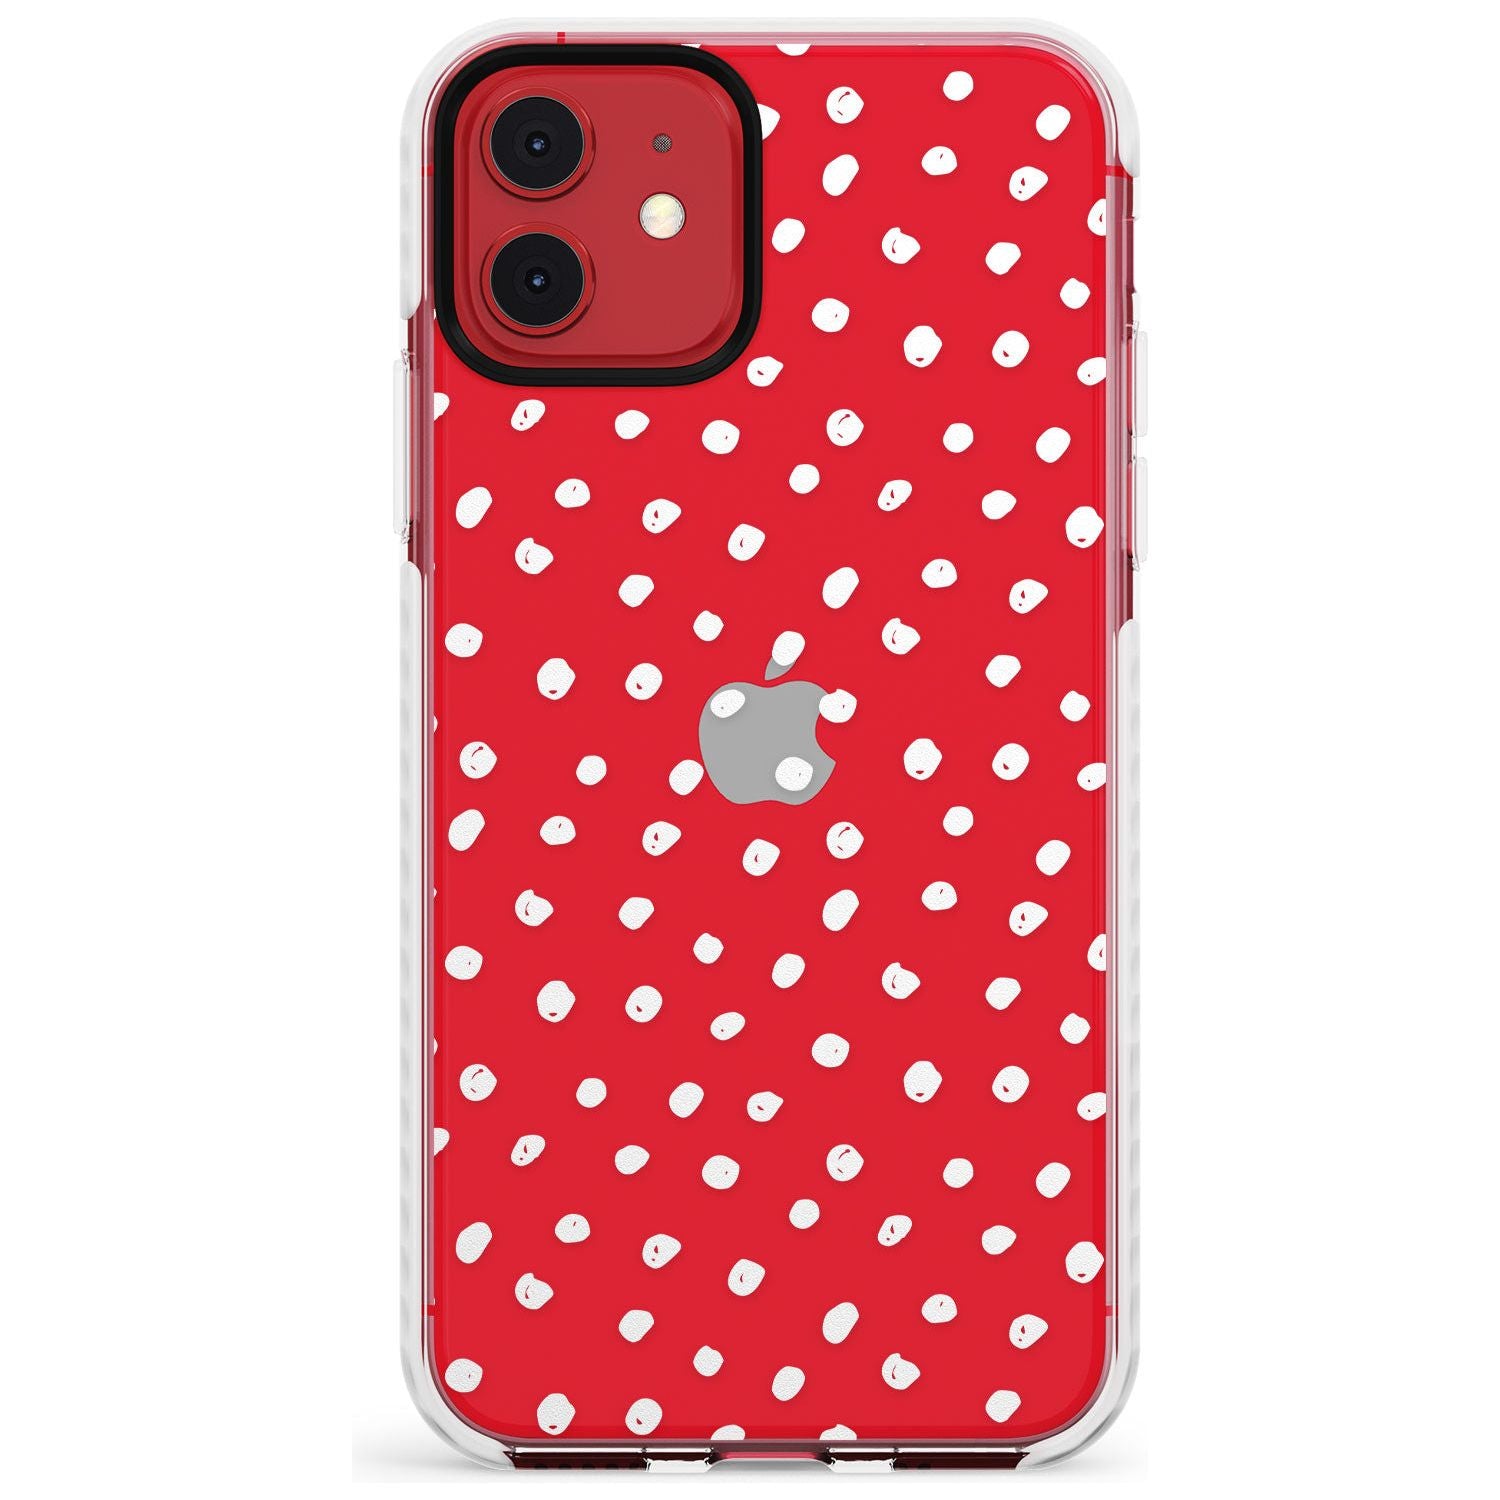 Messy White Dot Pattern Slim TPU Phone Case for iPhone 11